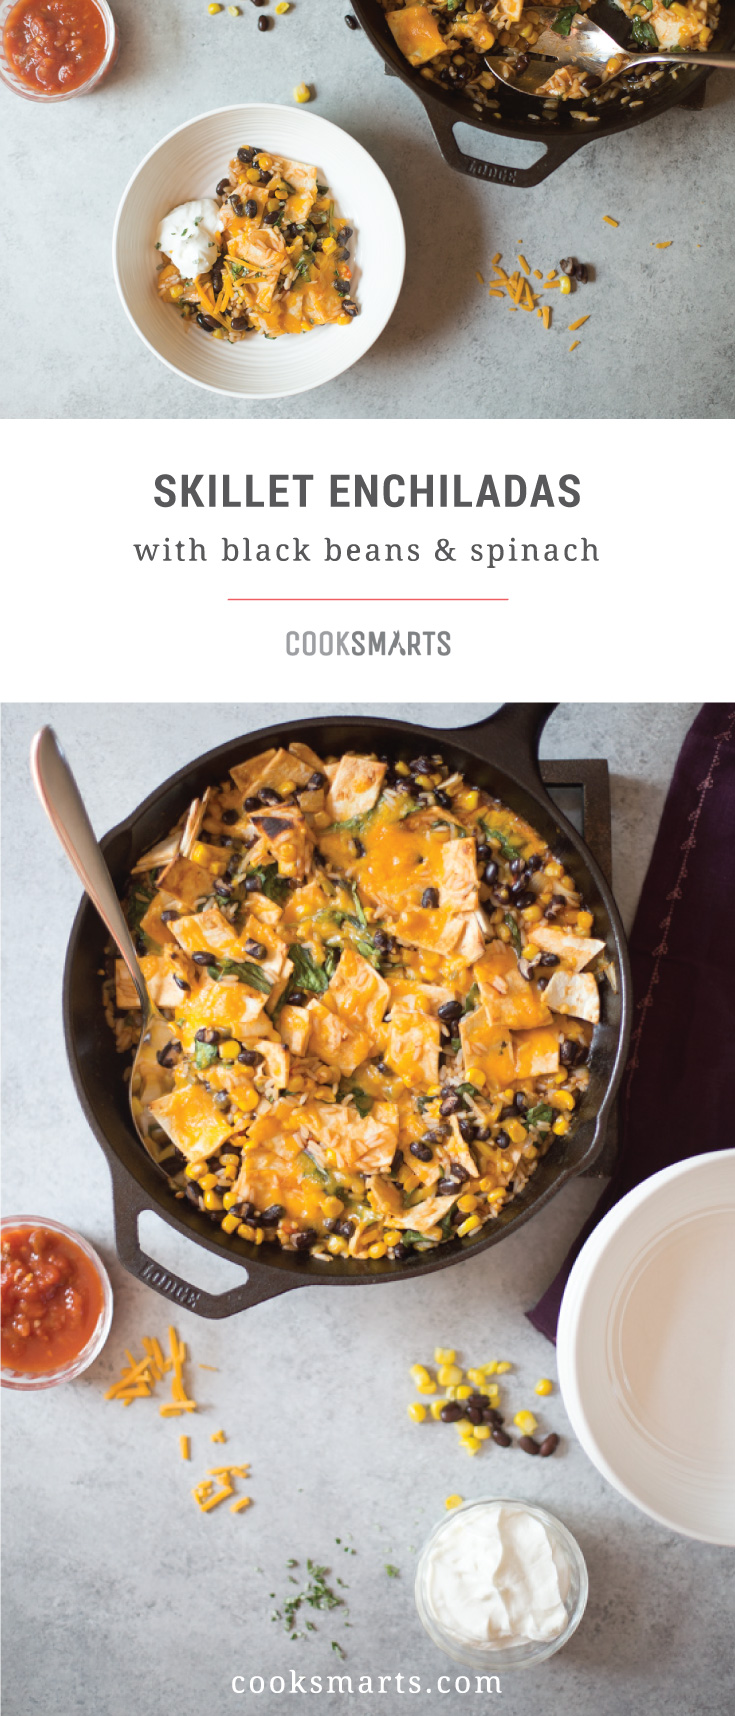 Cook Smarts Recipe: Skillet Enchiladas with Black Beans & Spinach